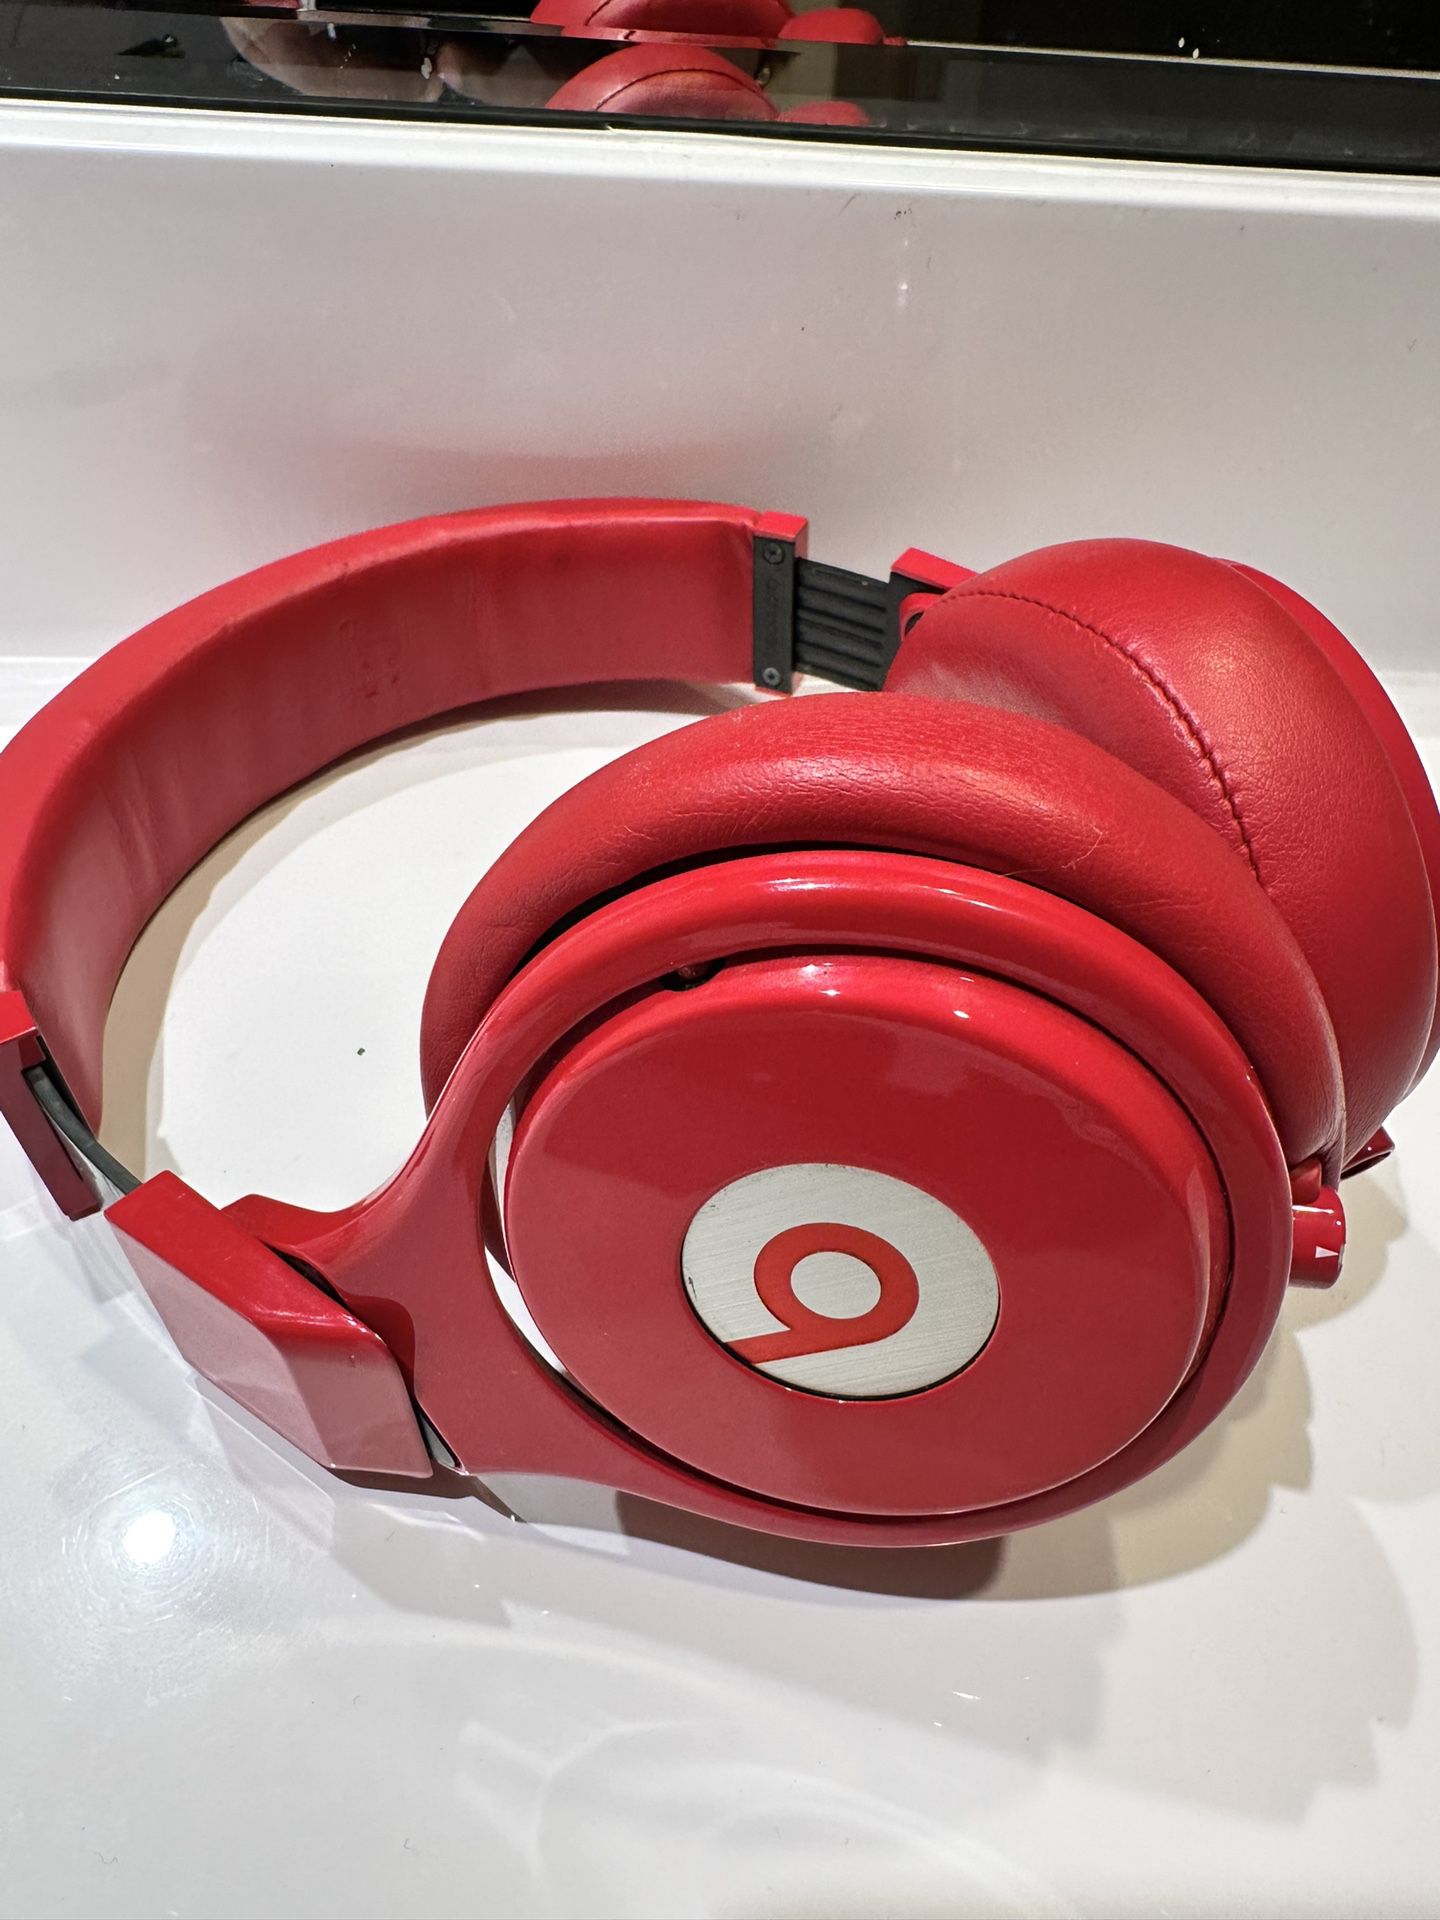 Beats by Dr. Dre Pro " Lil Wayne" Over the Ear Headphones - Red Limited Edition